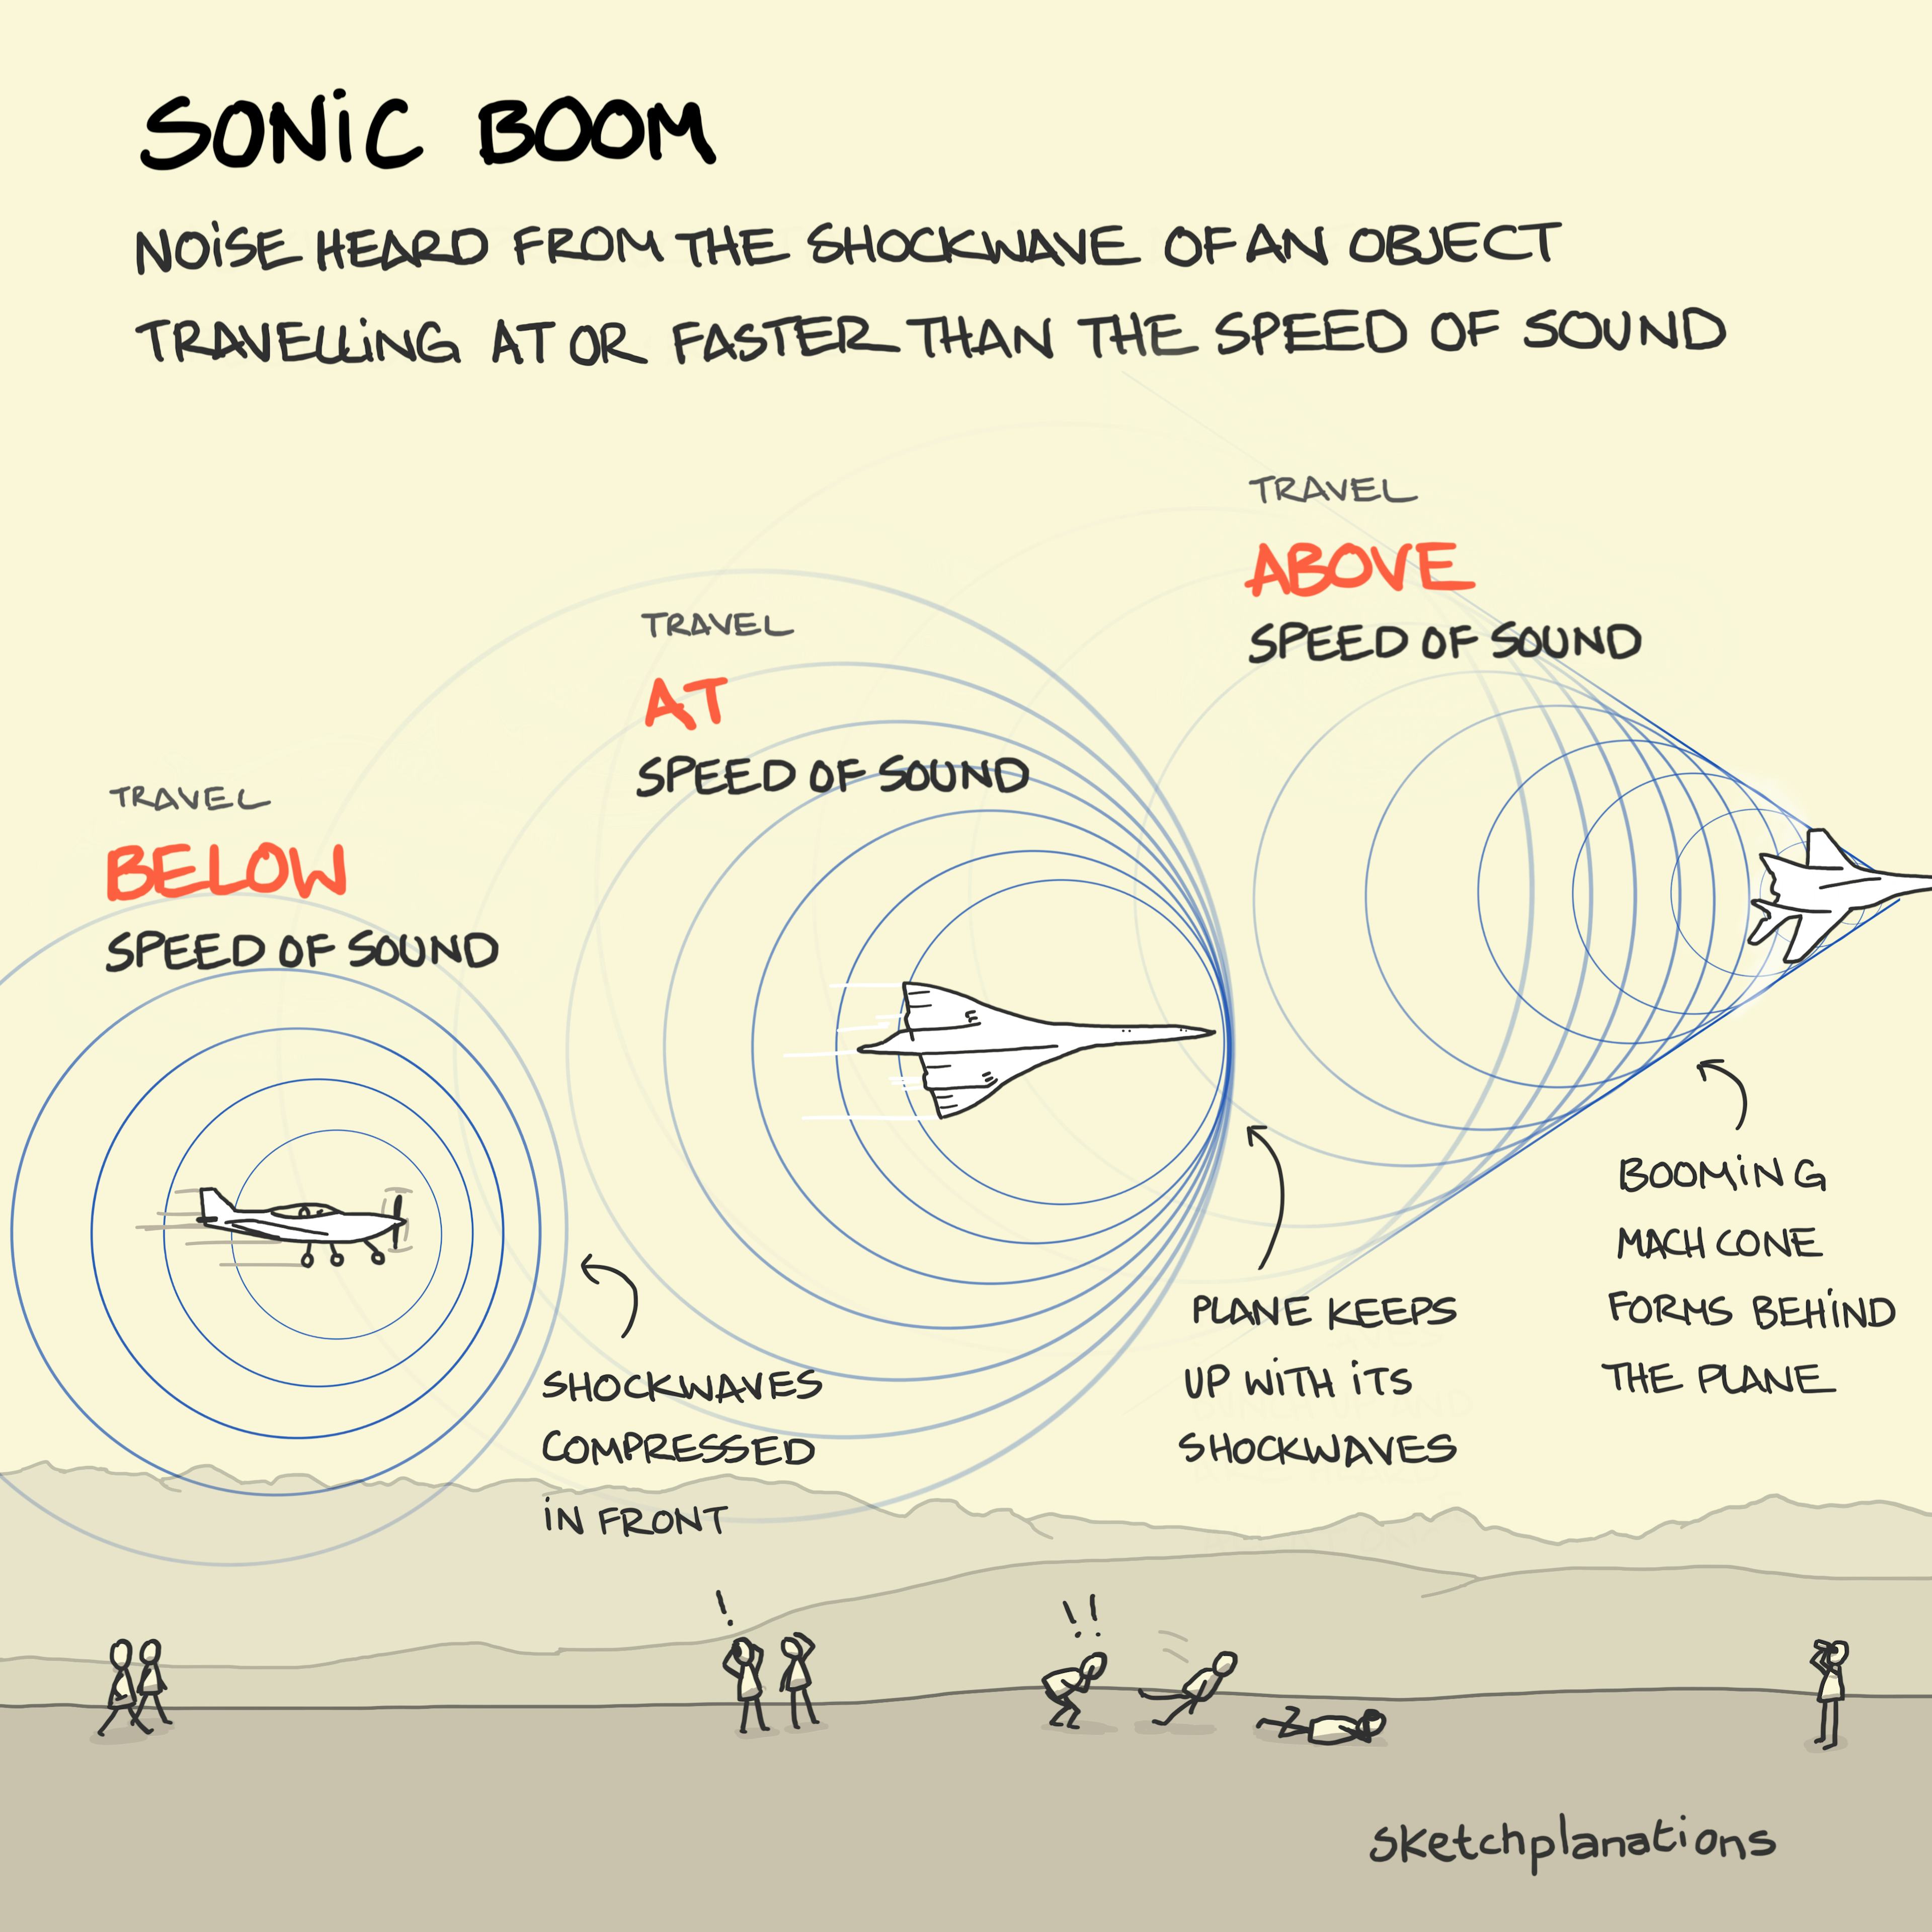 Sonic Boom illustration: a series of increasingly fast planes flying in the sky is shown from left to right, along with their position in relation to the sound shockwaves produced as the air in front of each plane is compressed. The plane on the left travels slower than the speed of sound and is thus behind its shockwaves. In the middle, the aircraft travels at the speed of sound and the shockwaves are shown bunching up near the nose of the plane. On the right, the supersonic, speedy aircraft surpasses the speed of sound creating a loud boom to the delight and / or fright of those on the ground nearby. 